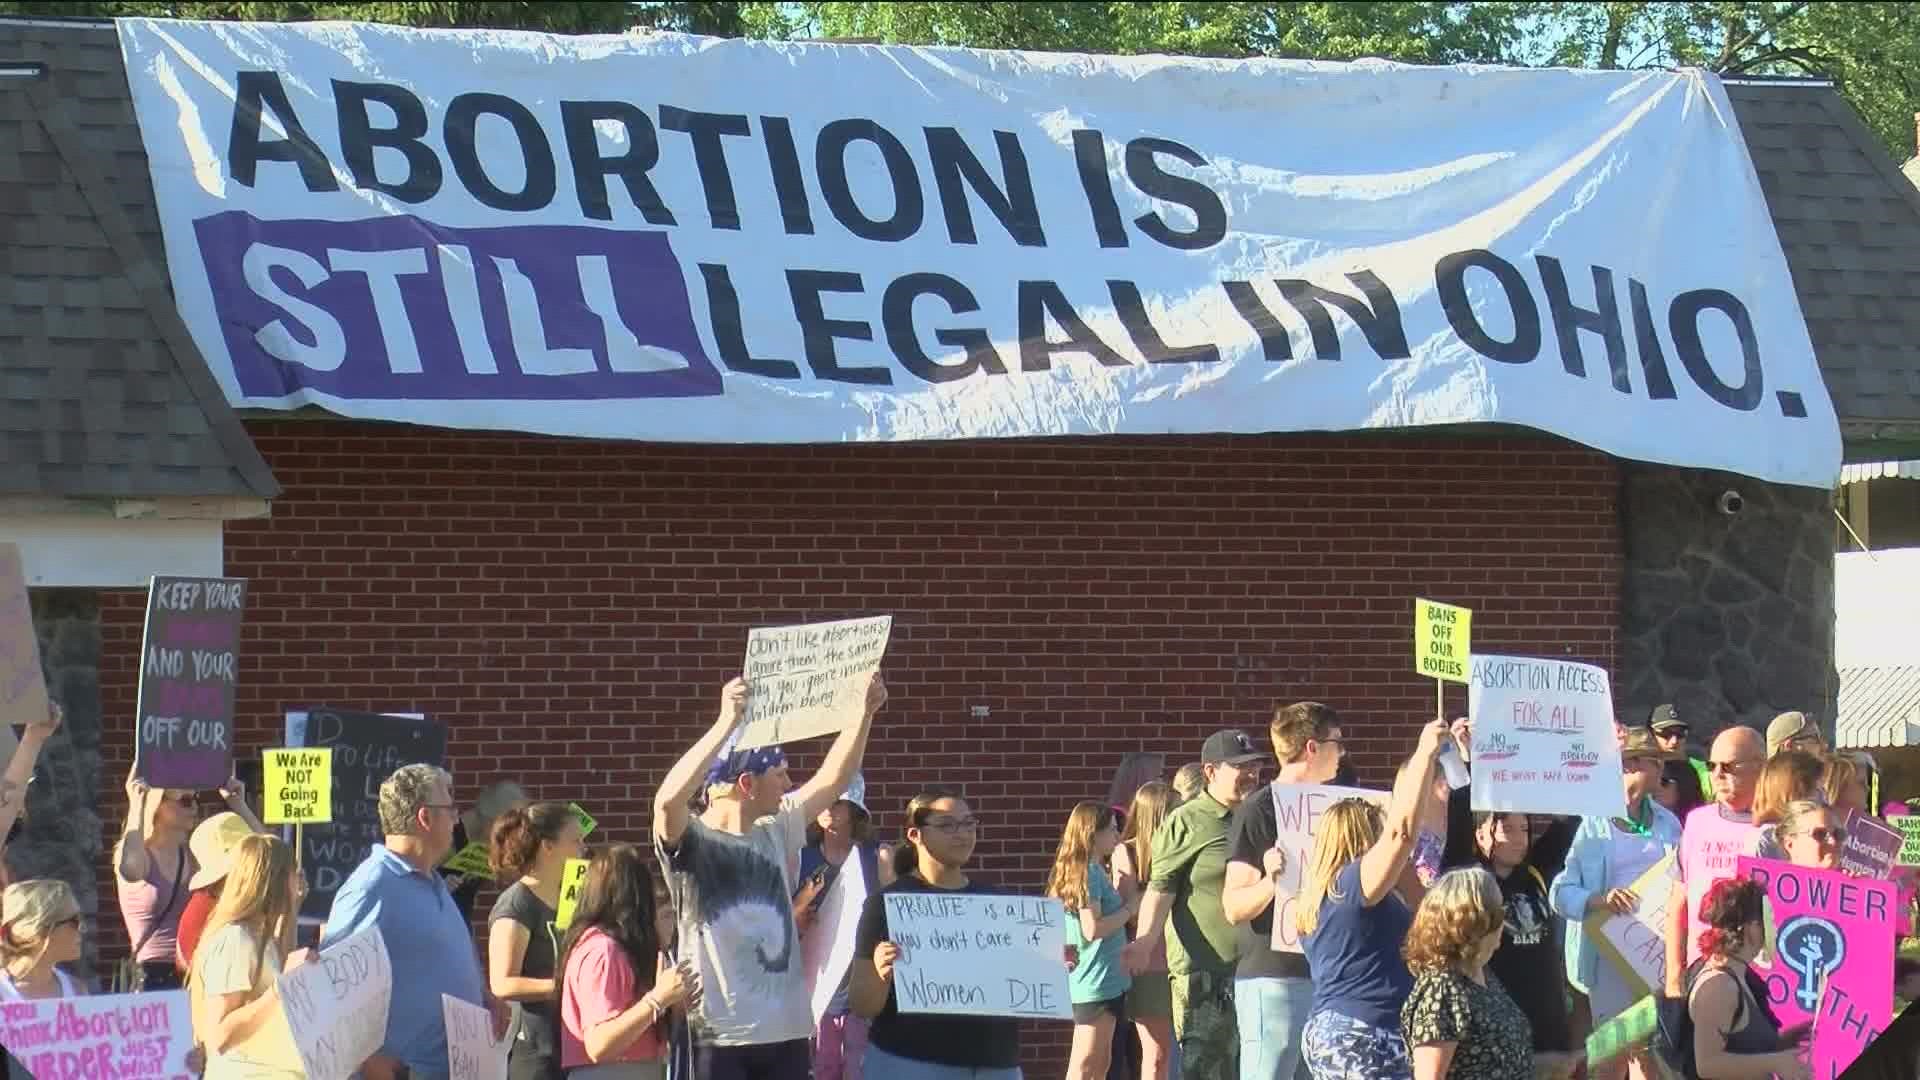 Women Have Options is reminding people abortion is still legal in Ohio even if the state's "heartbeat" law has made it much more difficult for woman seeking care.